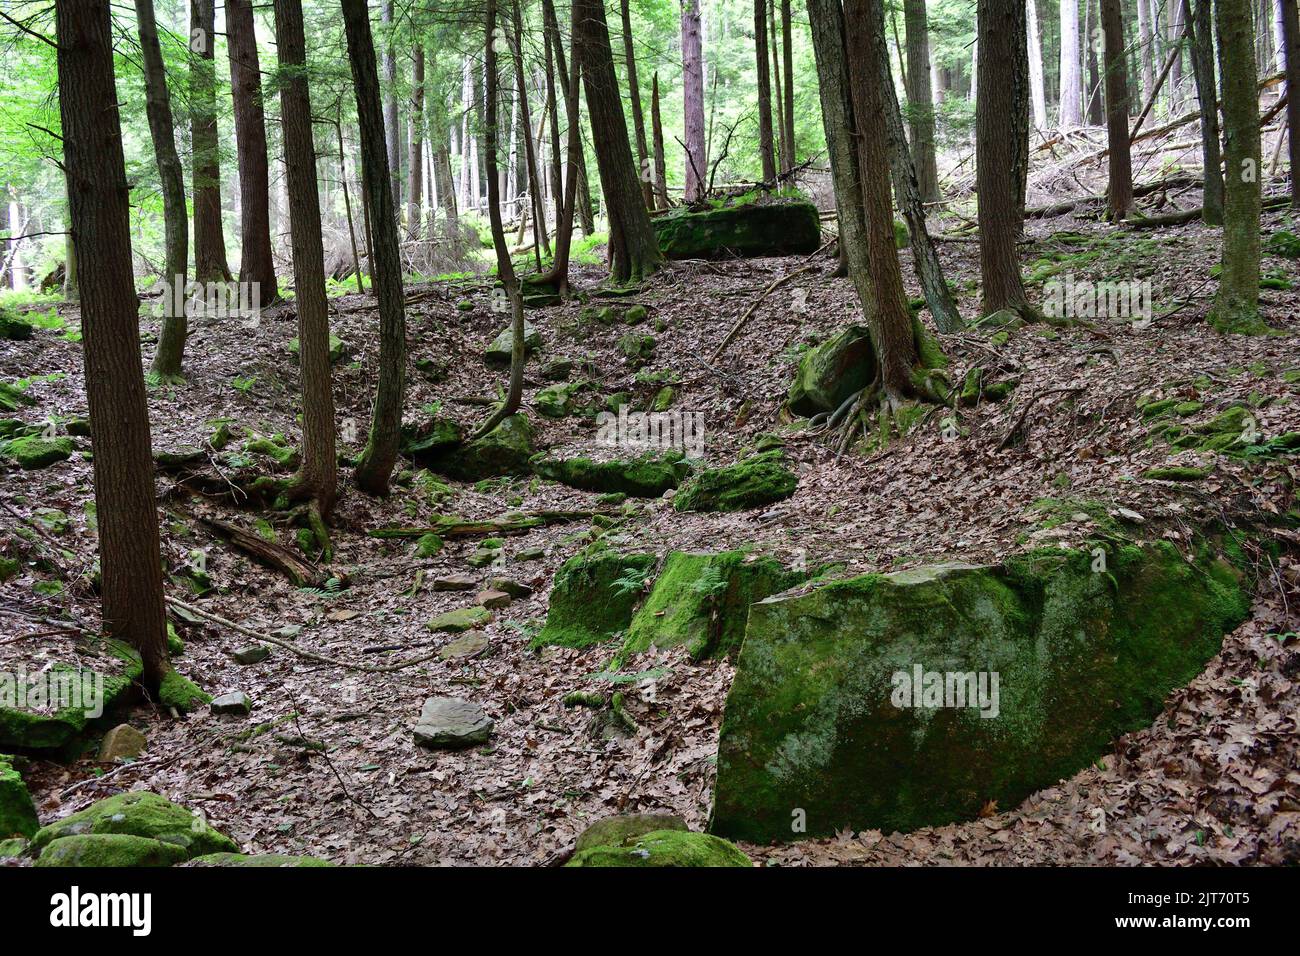 A view of trees thin barks in the Cook forest state park Stock Photo